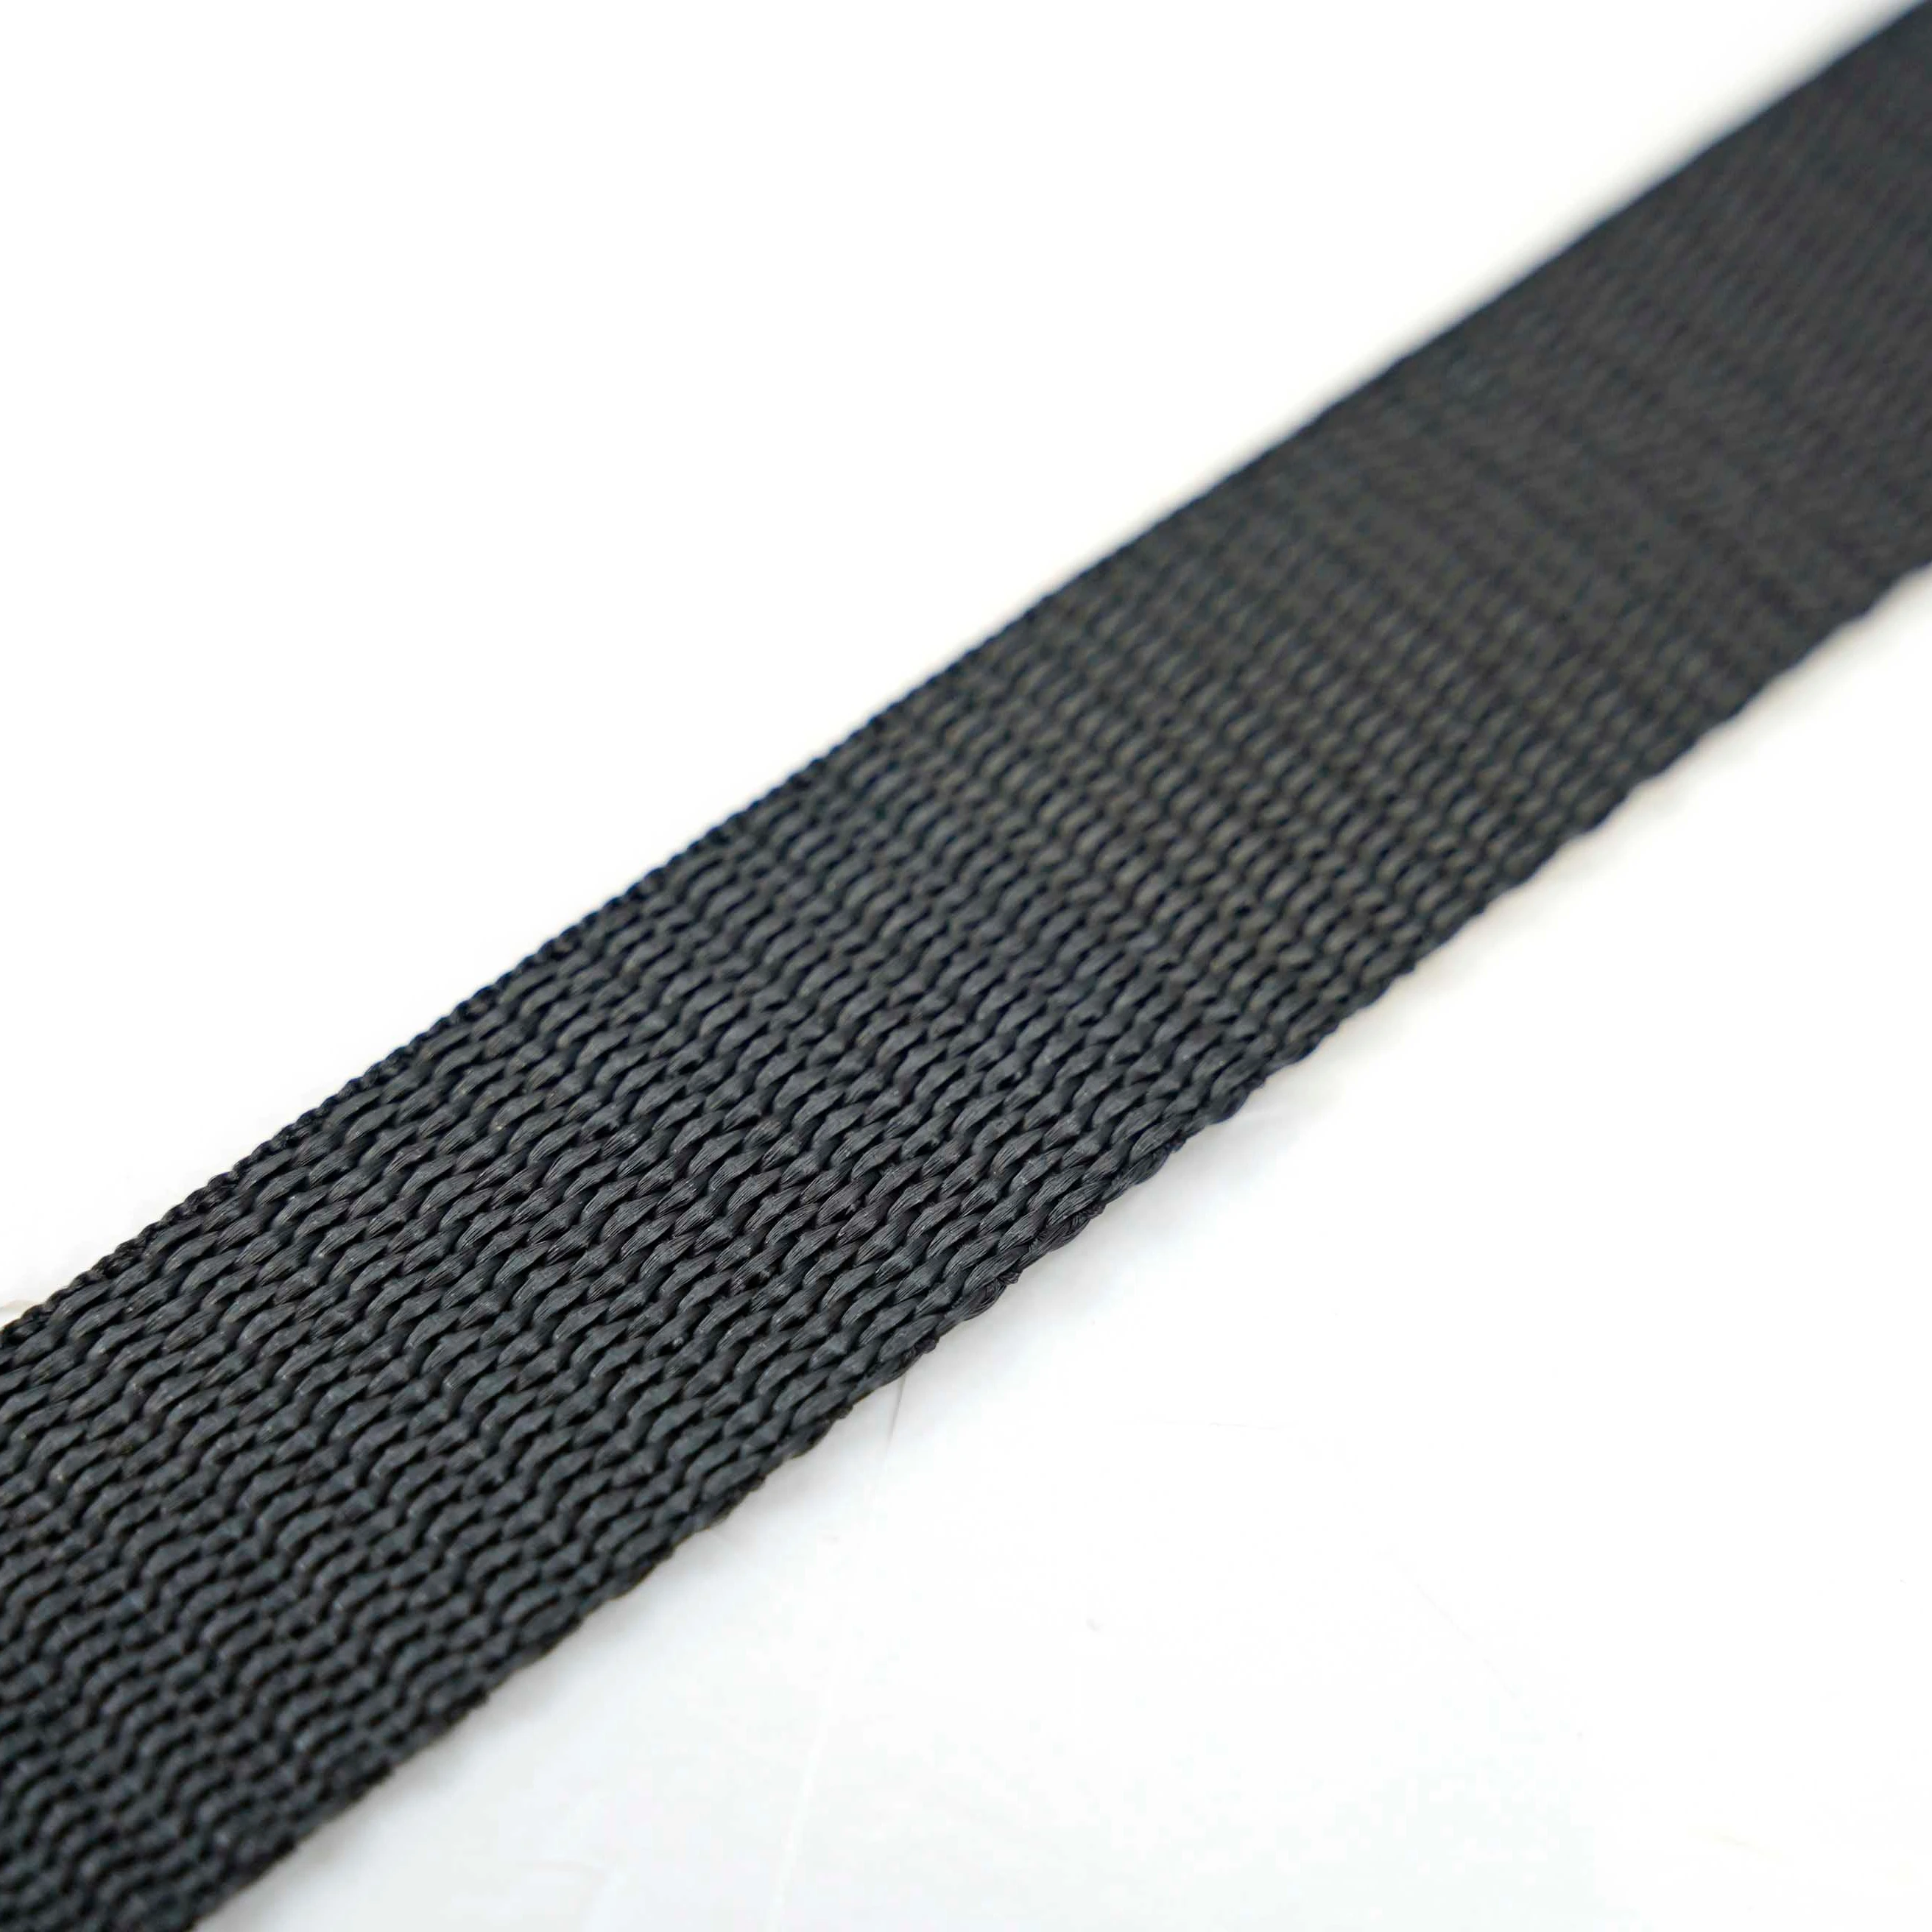 Customizable high quality muli color plain weave PP webbing for garment accessories (1600266304731)